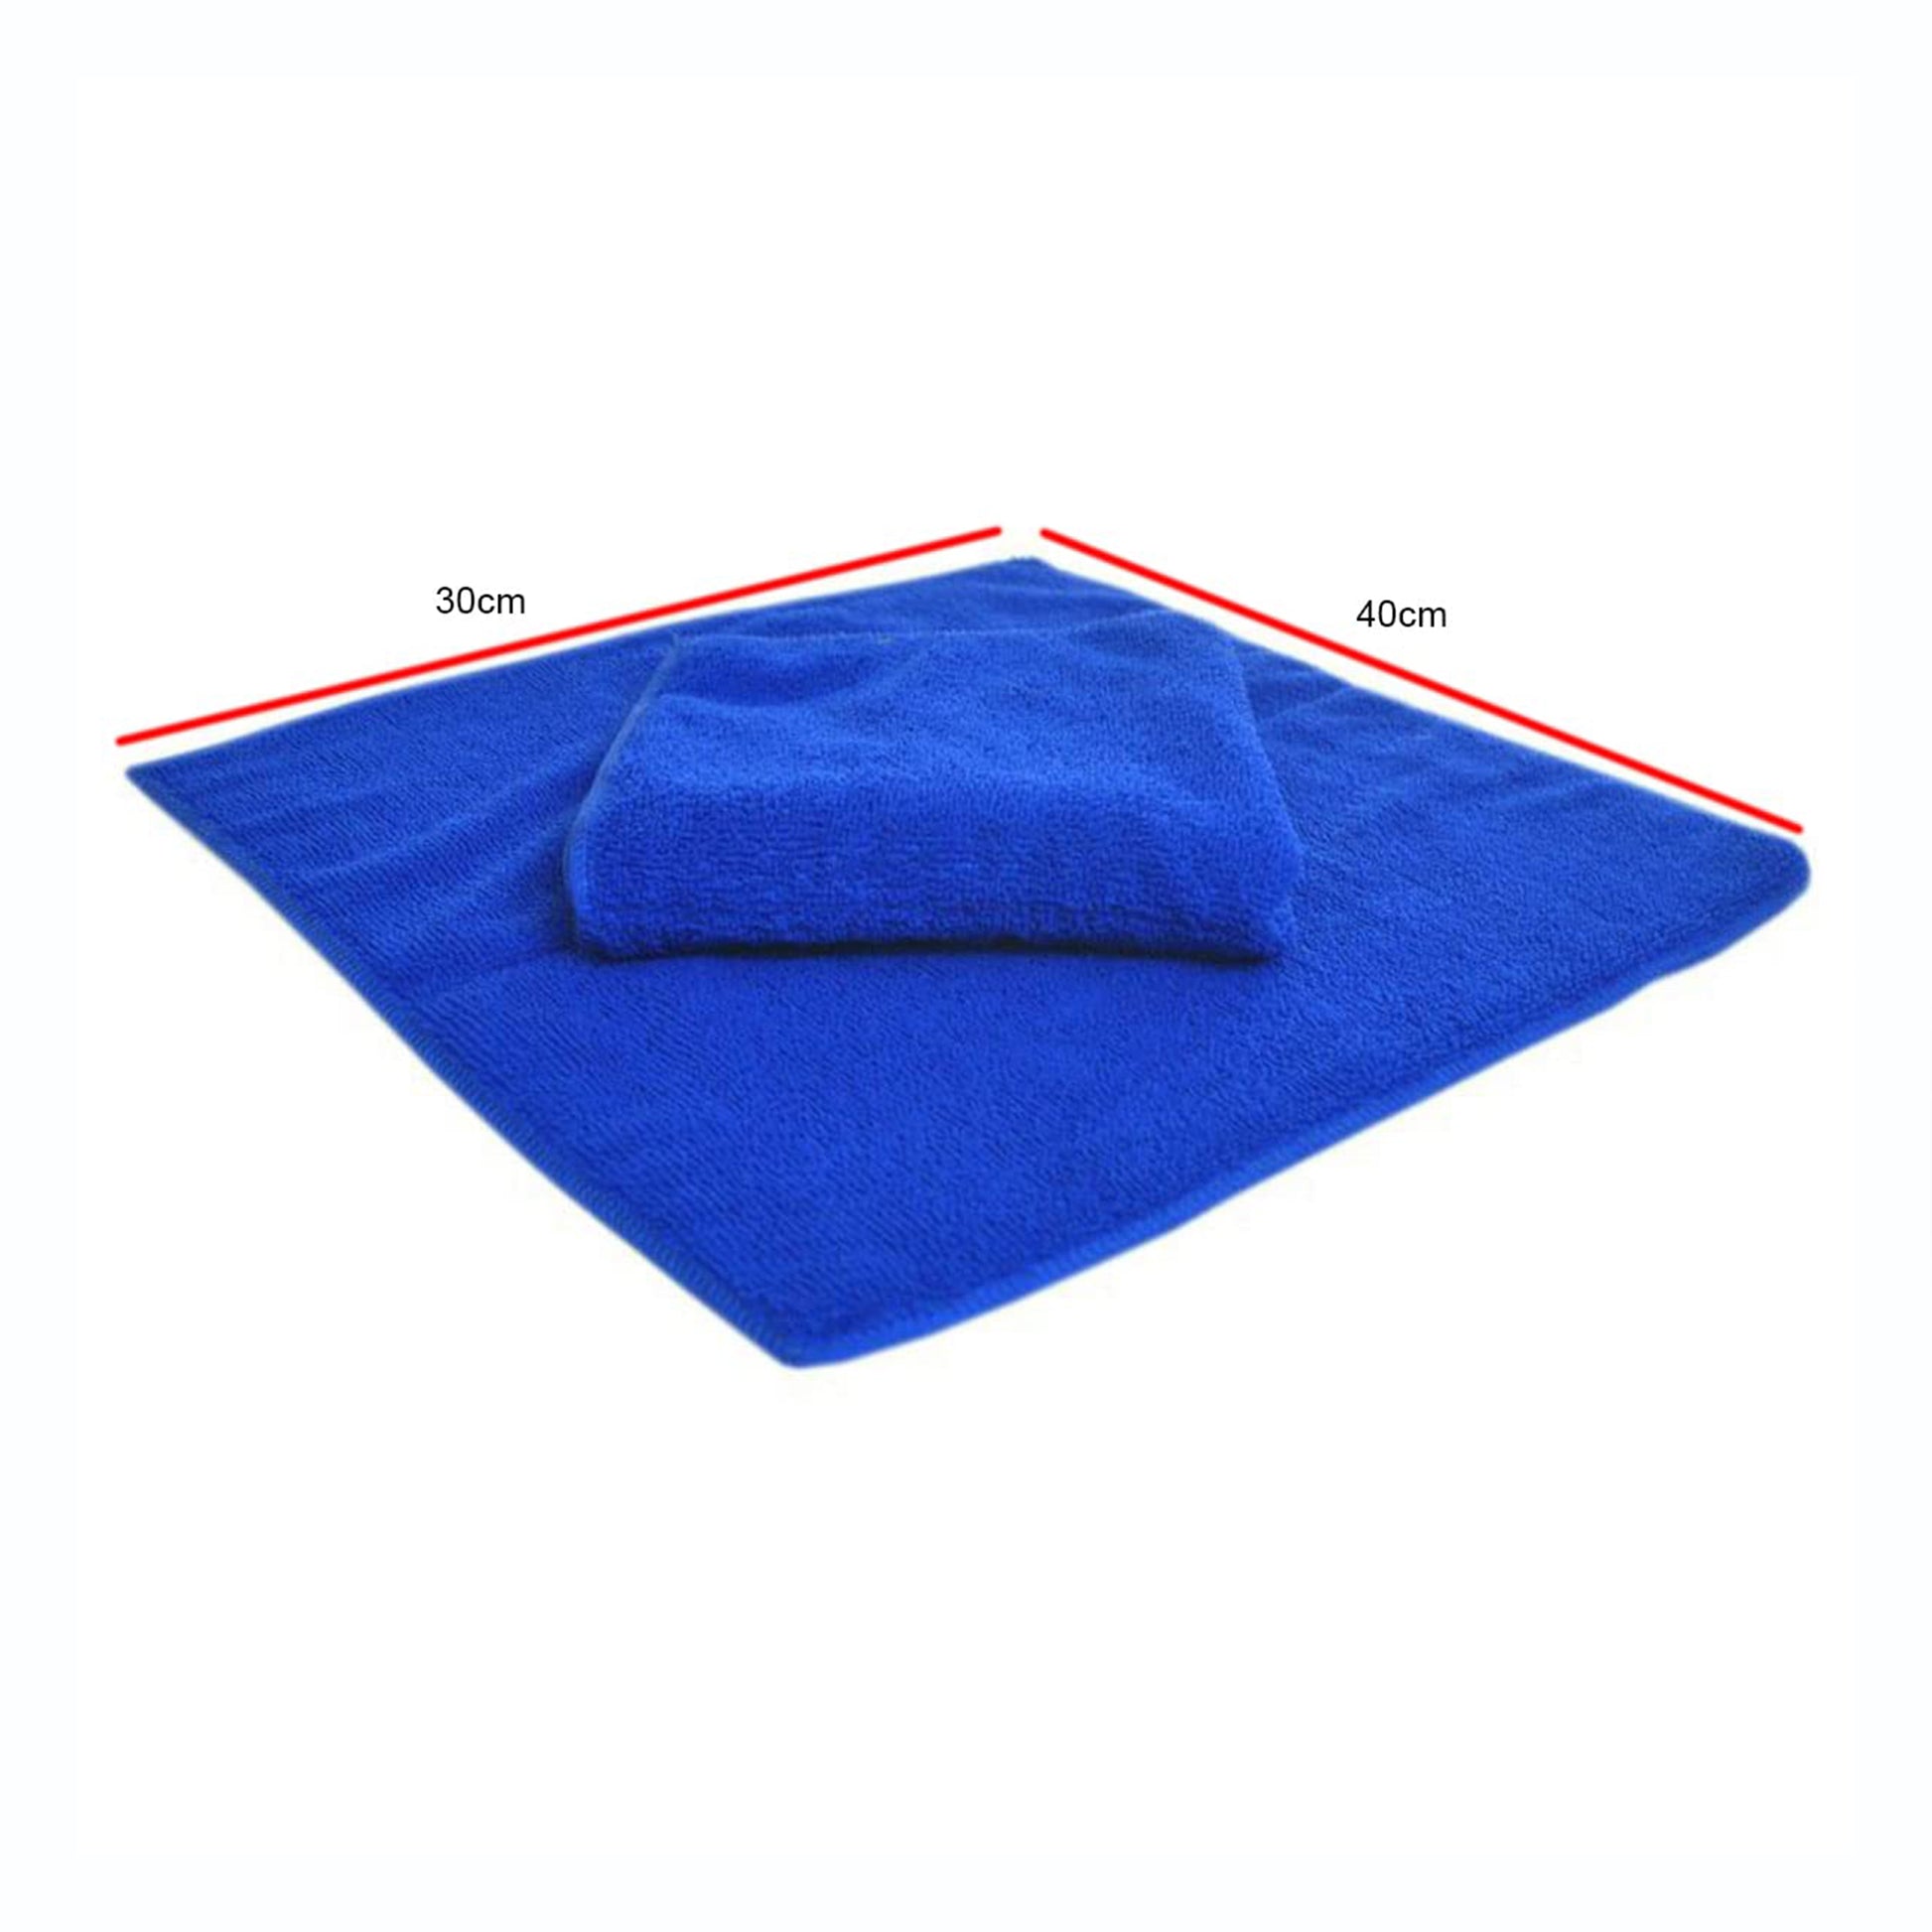 Signoraware - Glowmax Double Sided Microfiber Cleaning Towel , 600 G.S.M 40 x 30 Set Of 2 (Sw-6709) Multicolor - Ghar Sajawat